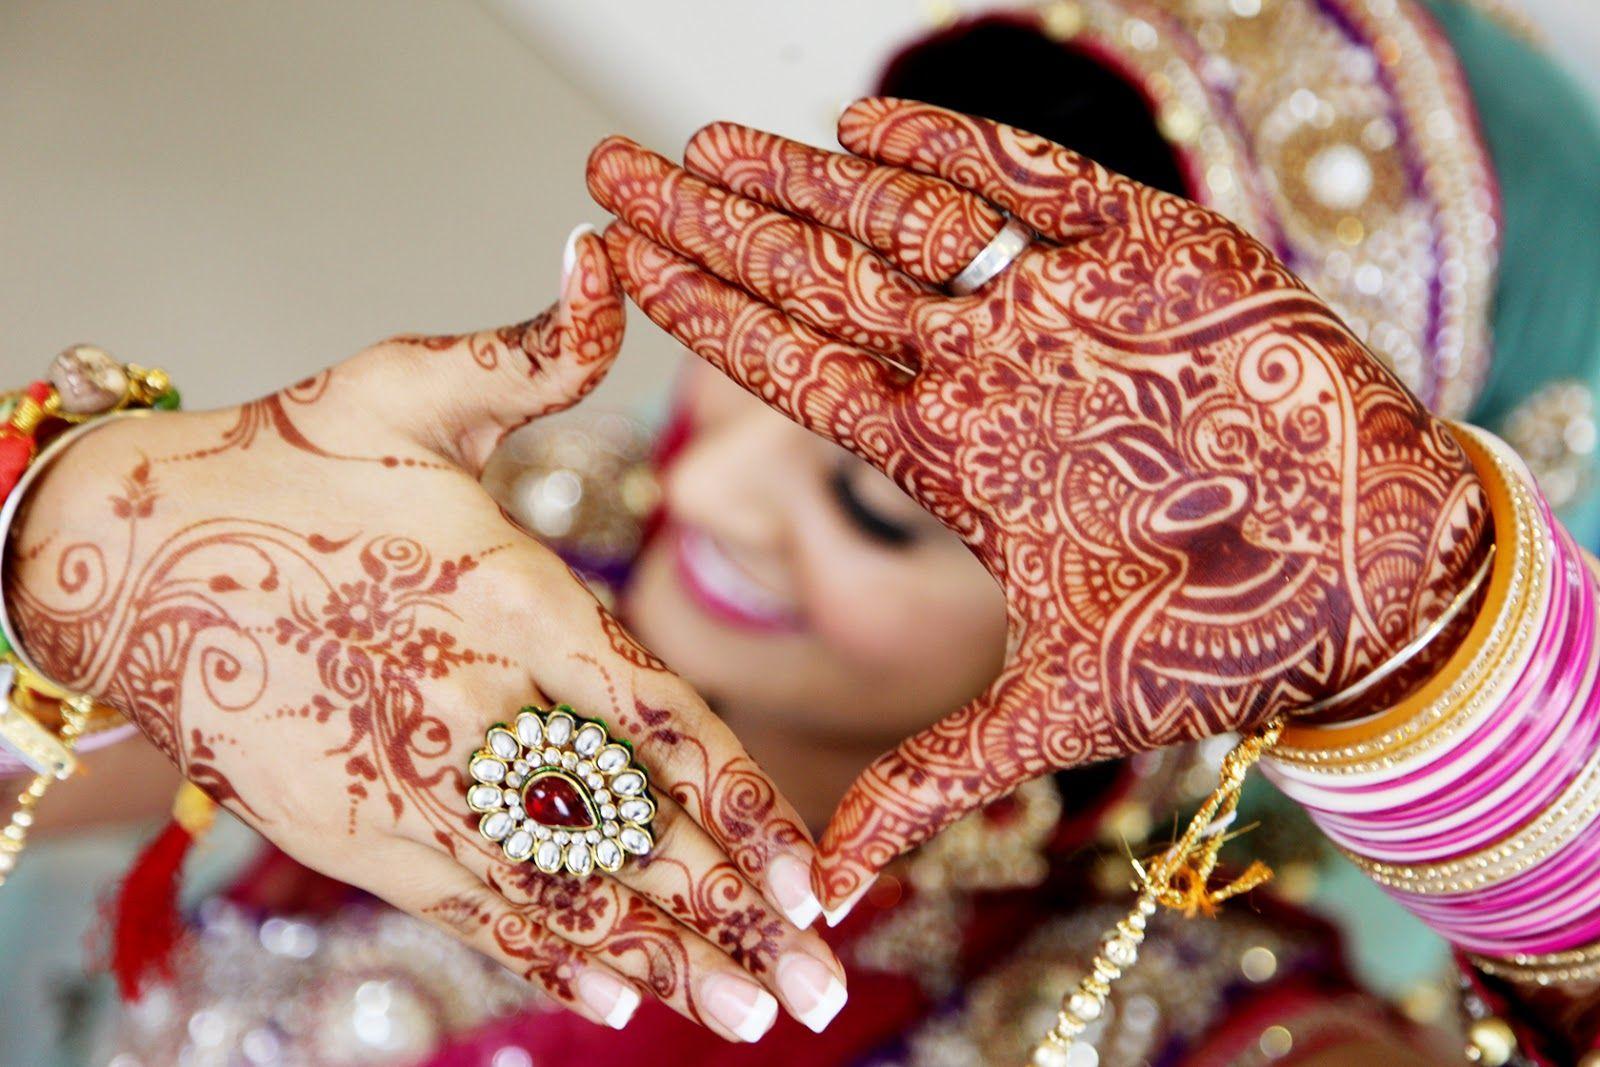 Wallpaper. Image. Picpile: Why NRI's Always Married Indian